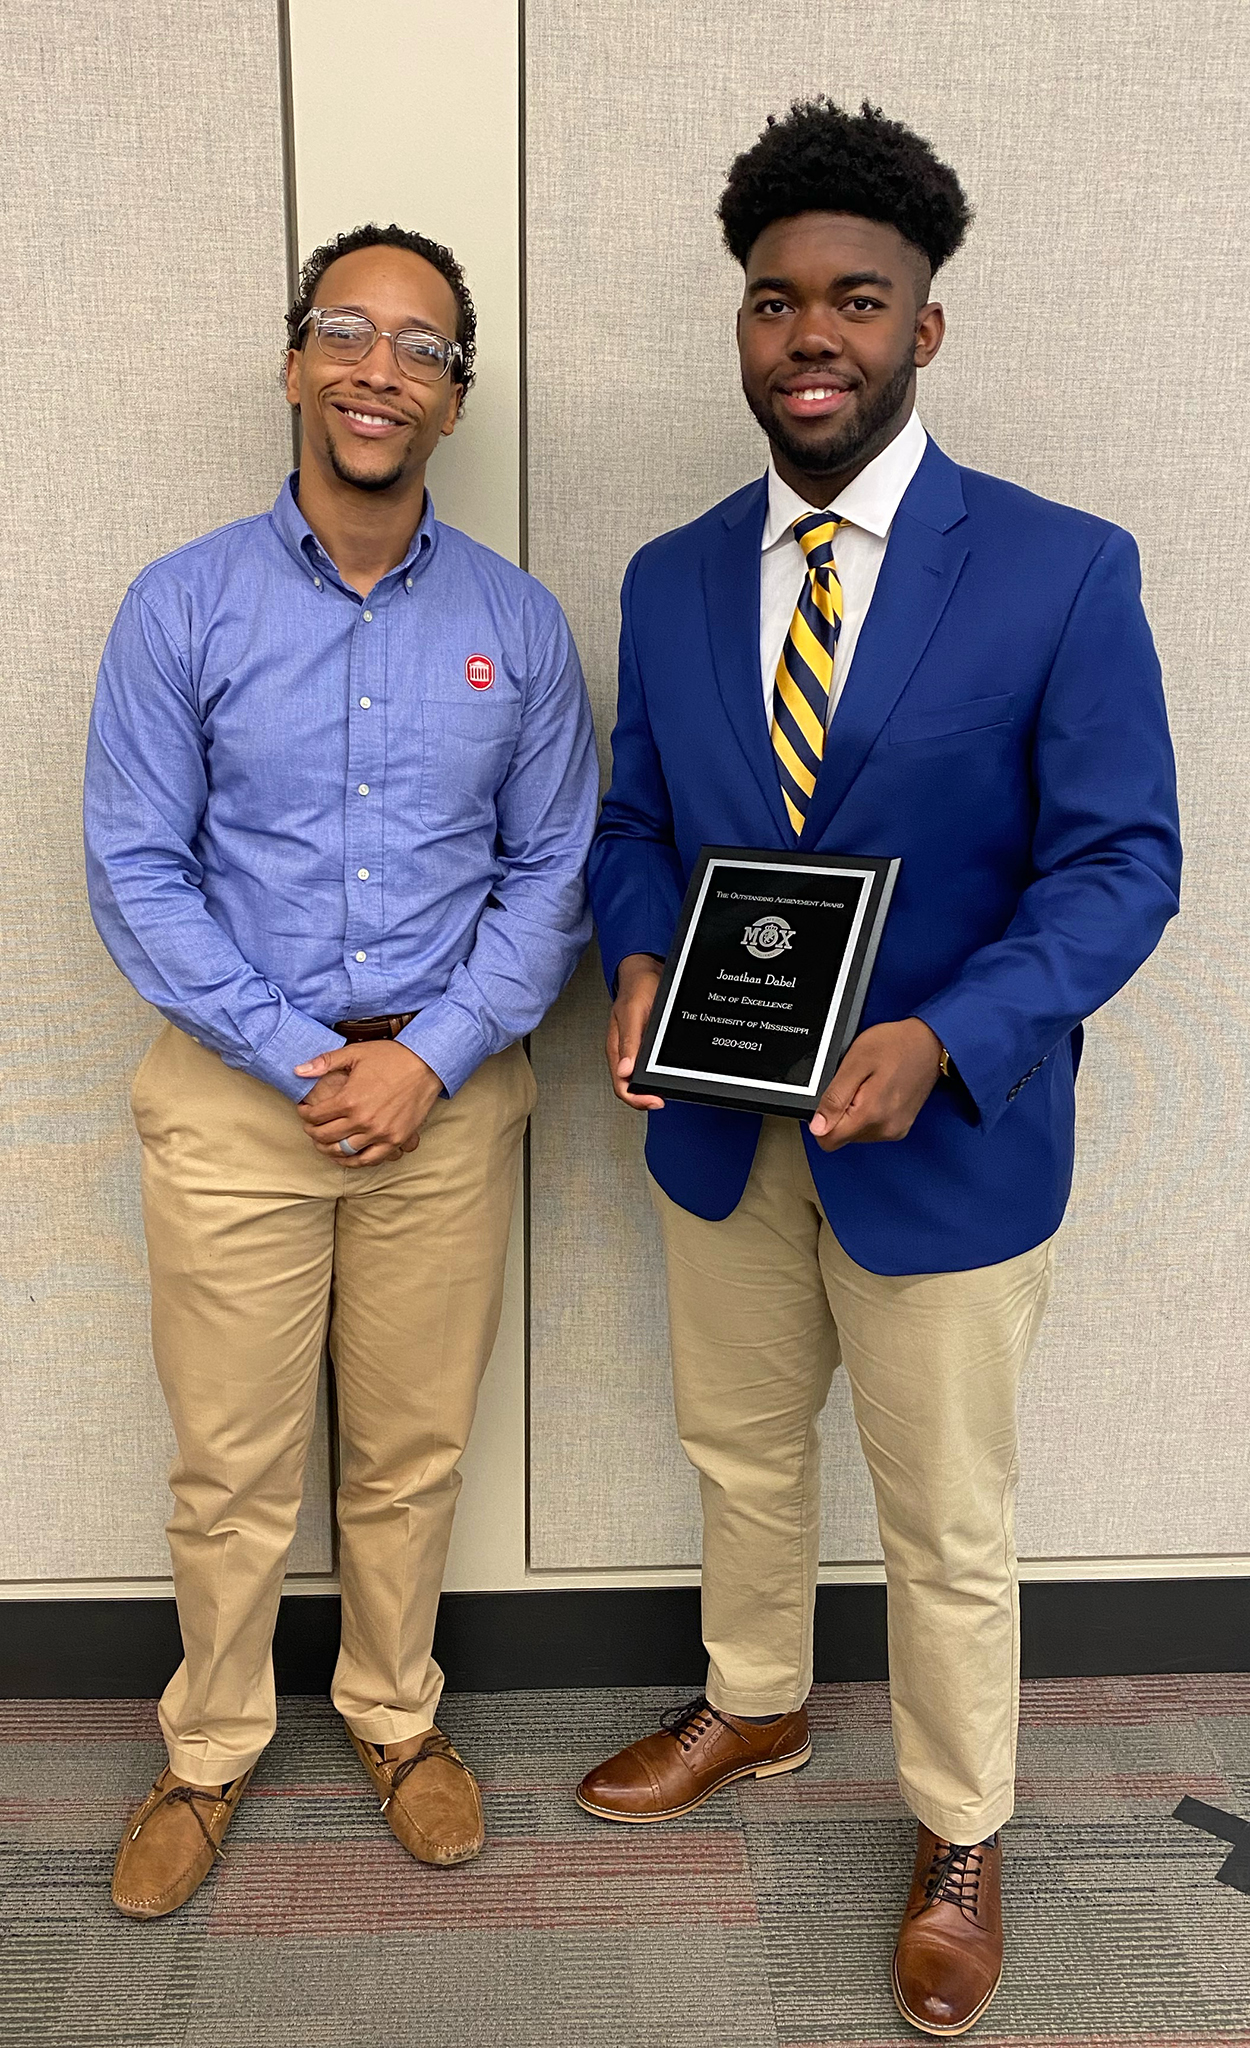 EJ Edney (left), UM assistant vice chancellor of diversity and inclusion, congratulates Jonathan Dabel for receiving an award from the Men of Excellence organization. Edney has served as a mentor for Dabel during his time on campus. Submitted photo